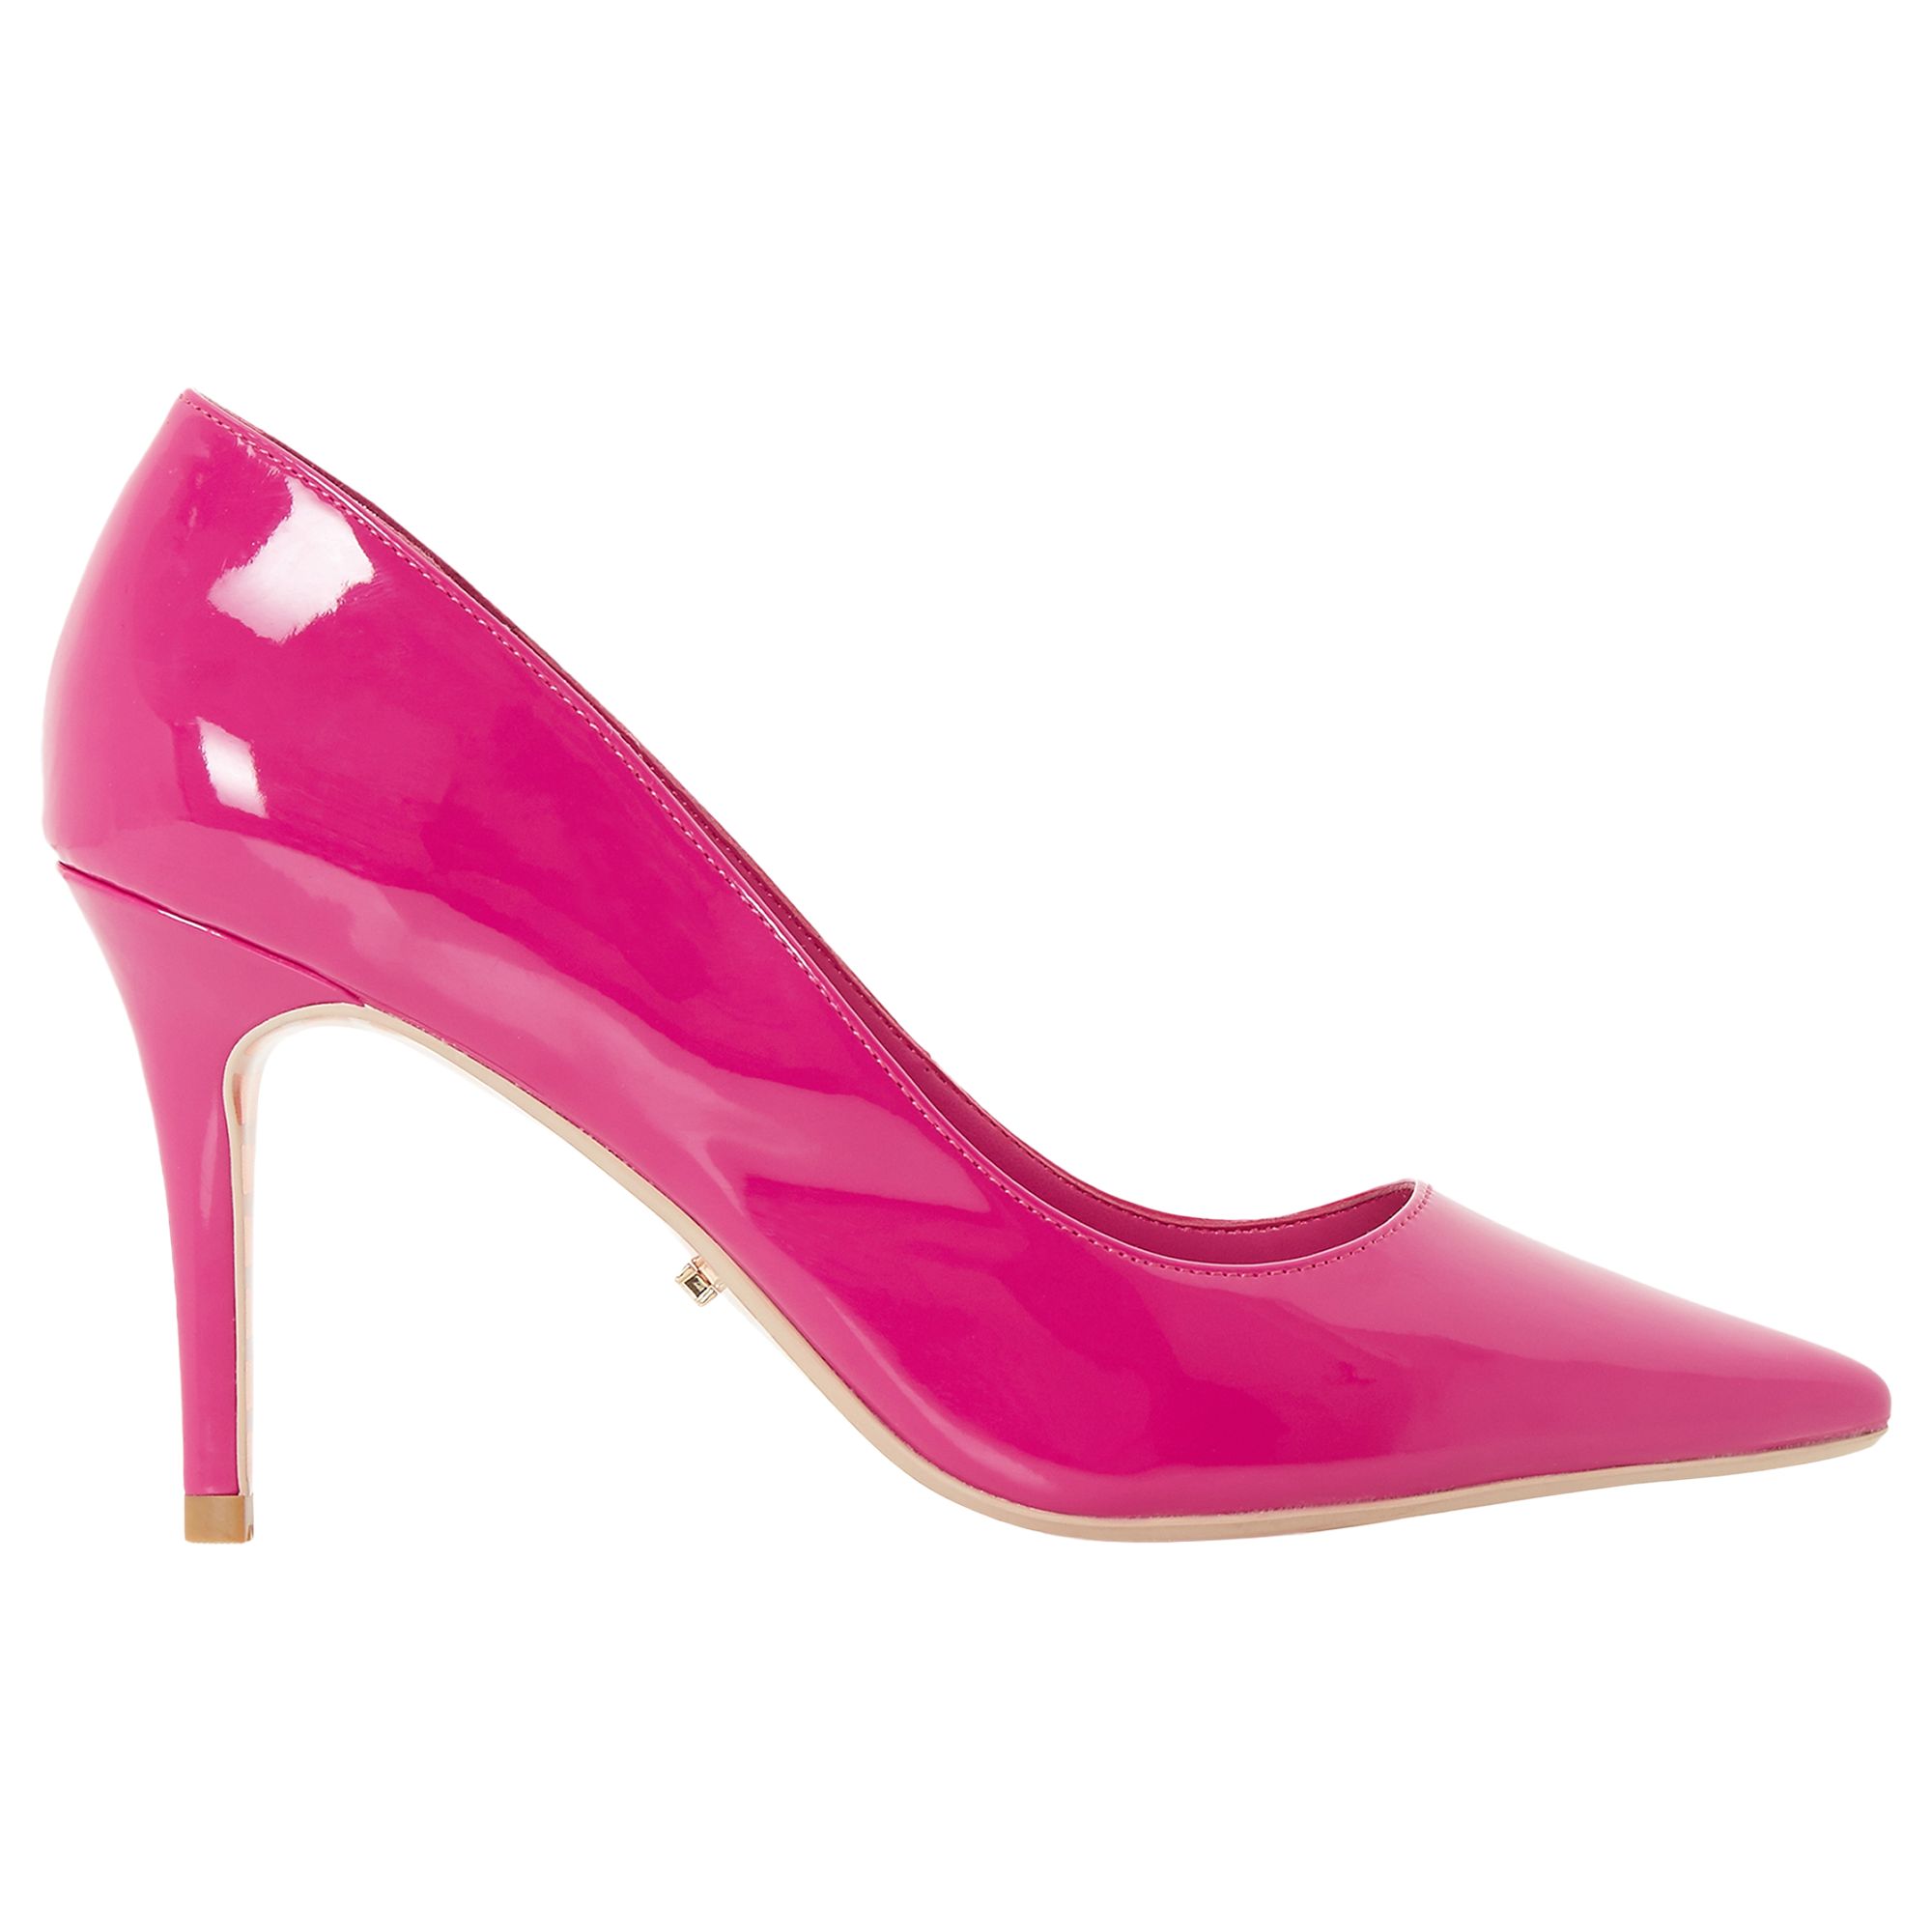 Dune Aurrora Pointed Toe Court Shoes, Pink, 3